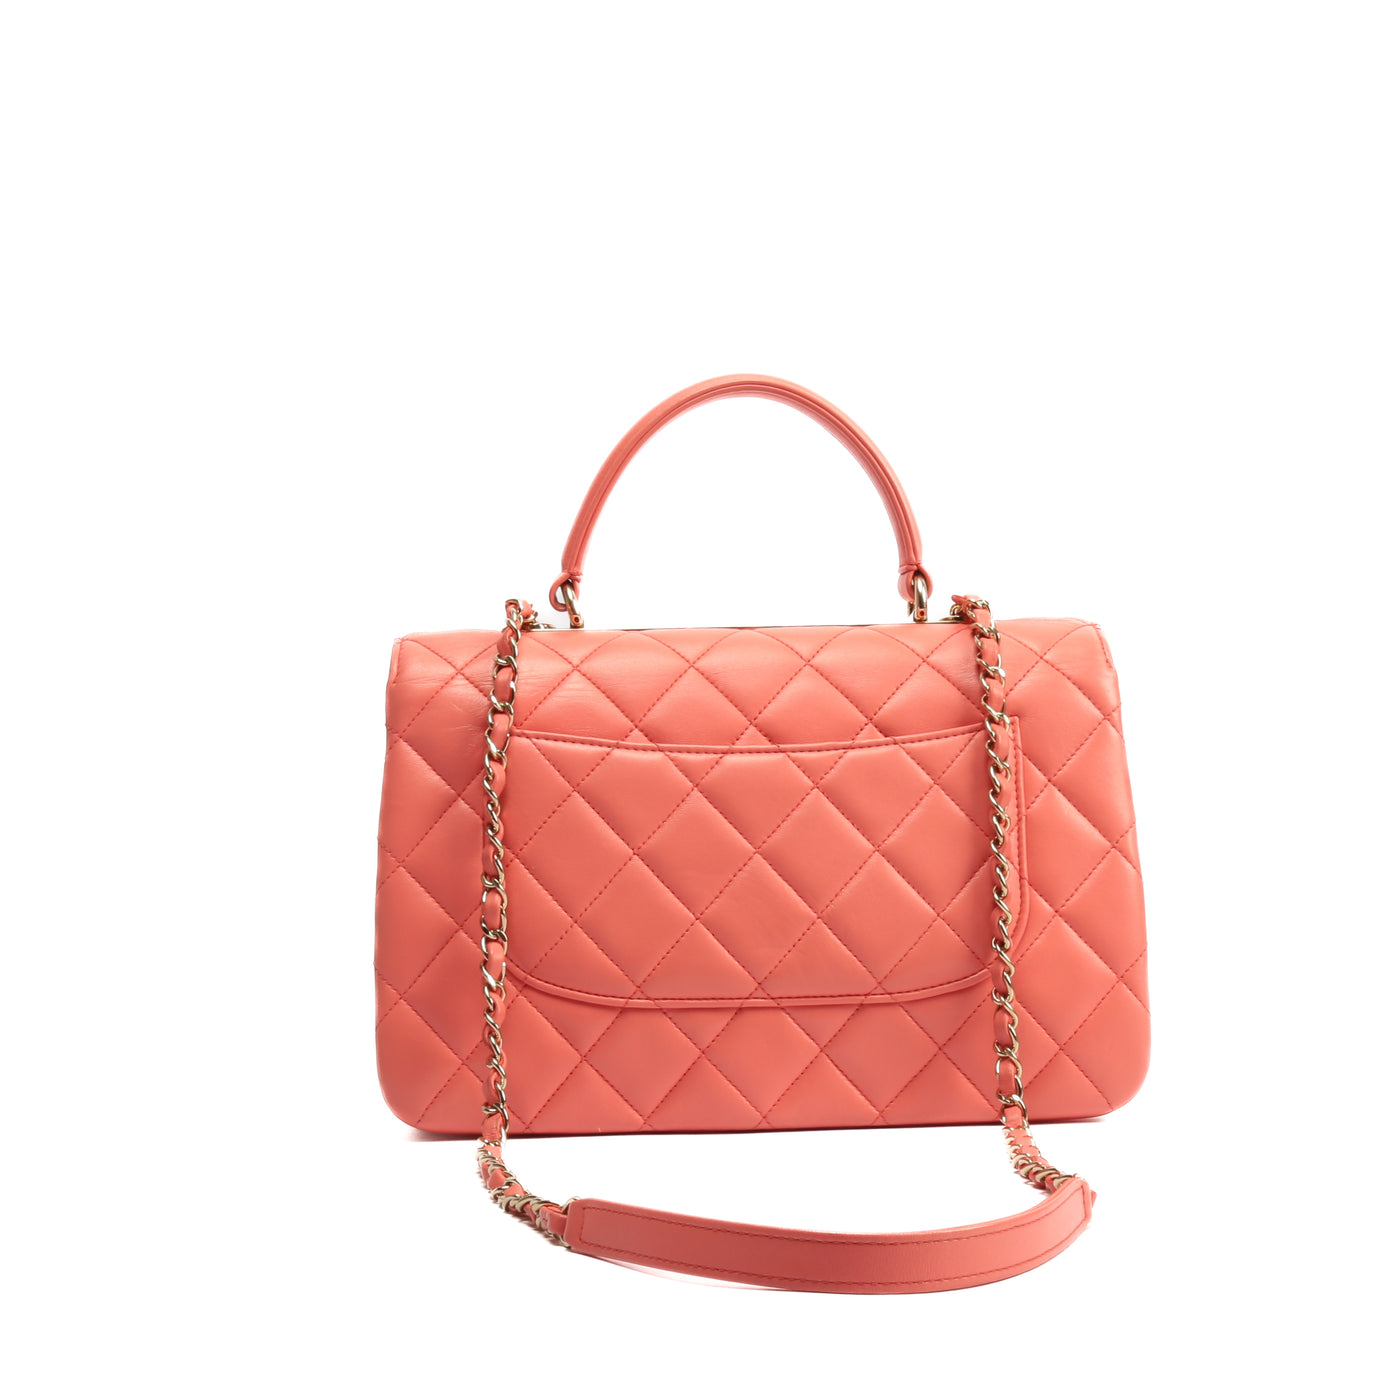 Chanel 2017 17P Trendy CC Small Top Handle Bag Coral Pink A92236